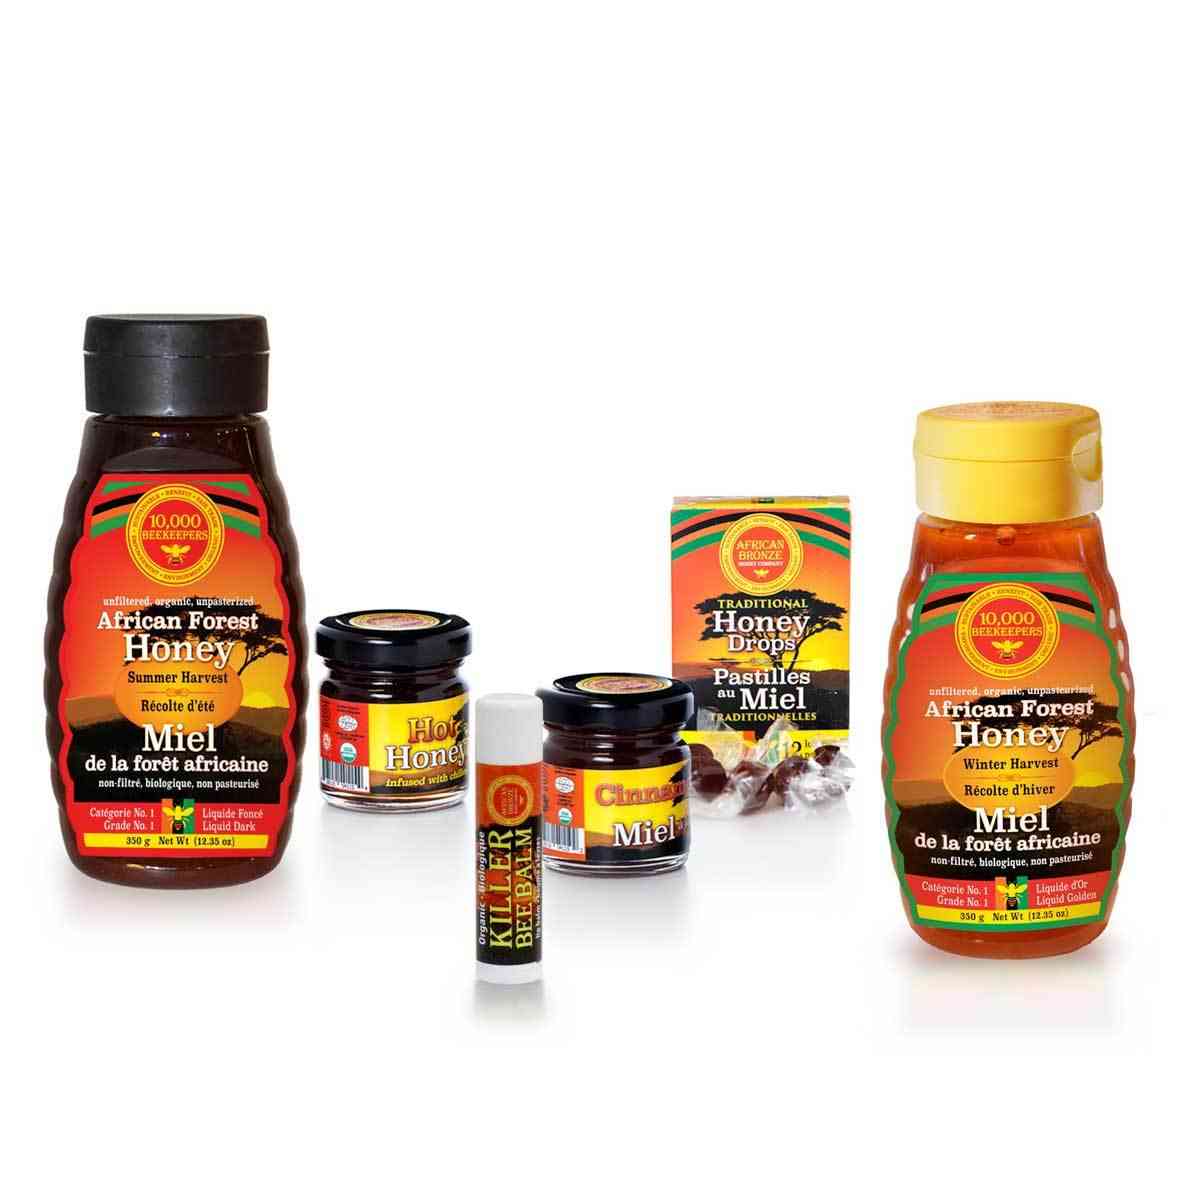 African Forest Honey Products